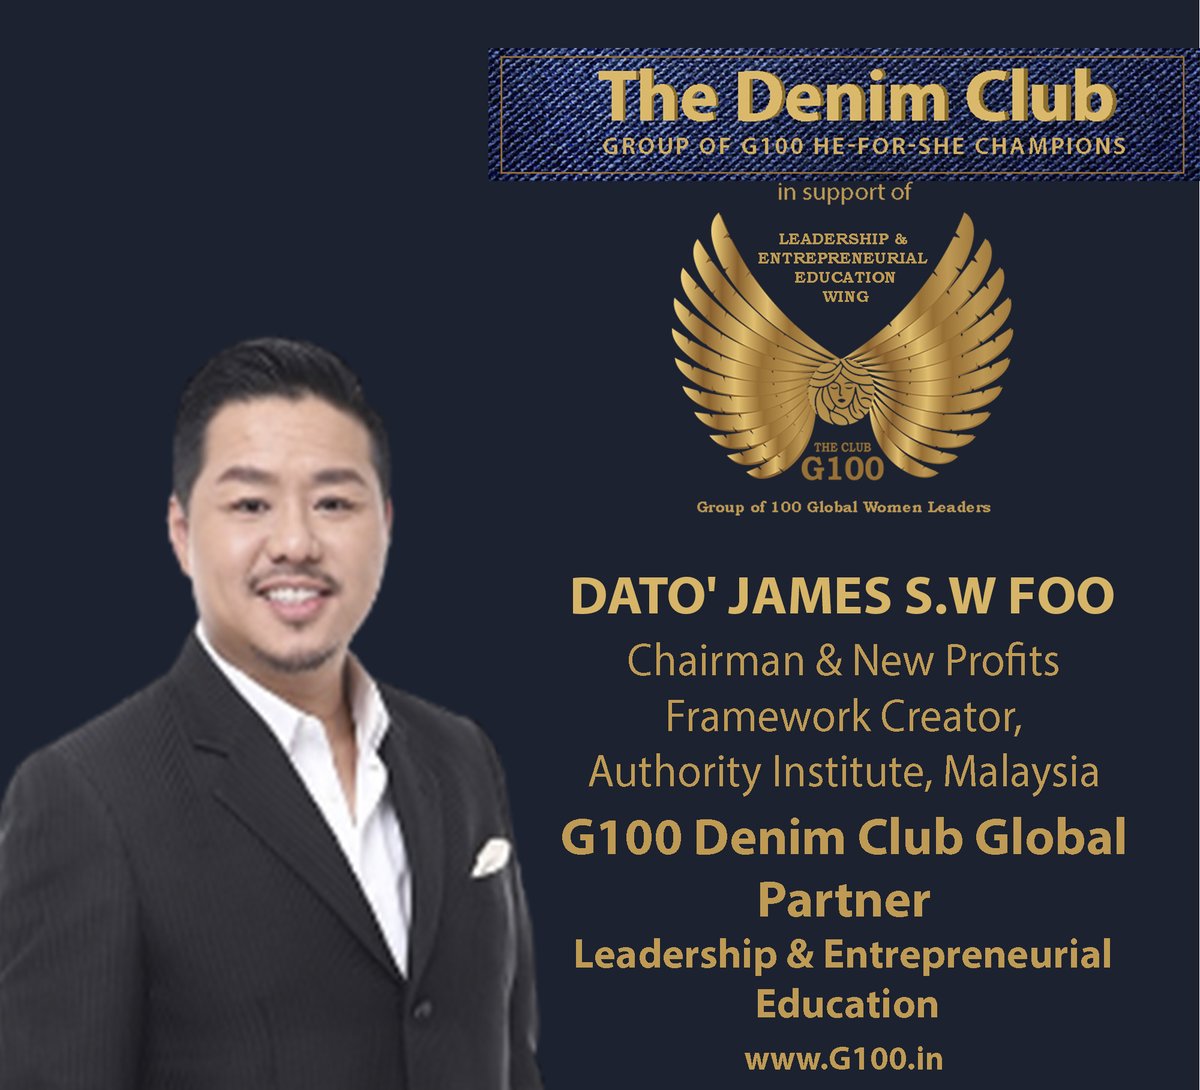 On behalf of Coco Wong, G100 Global Chair Leadership & Entrepreneurial Education, welcoming for this wing G100 Denim Club partner & inspiring leader, Dato' James S.W Foo, Chairman & New Profits, Framework Creator, Authority Institute, Malaysia.  #G100denimclub #HeForShe @Co_Wong